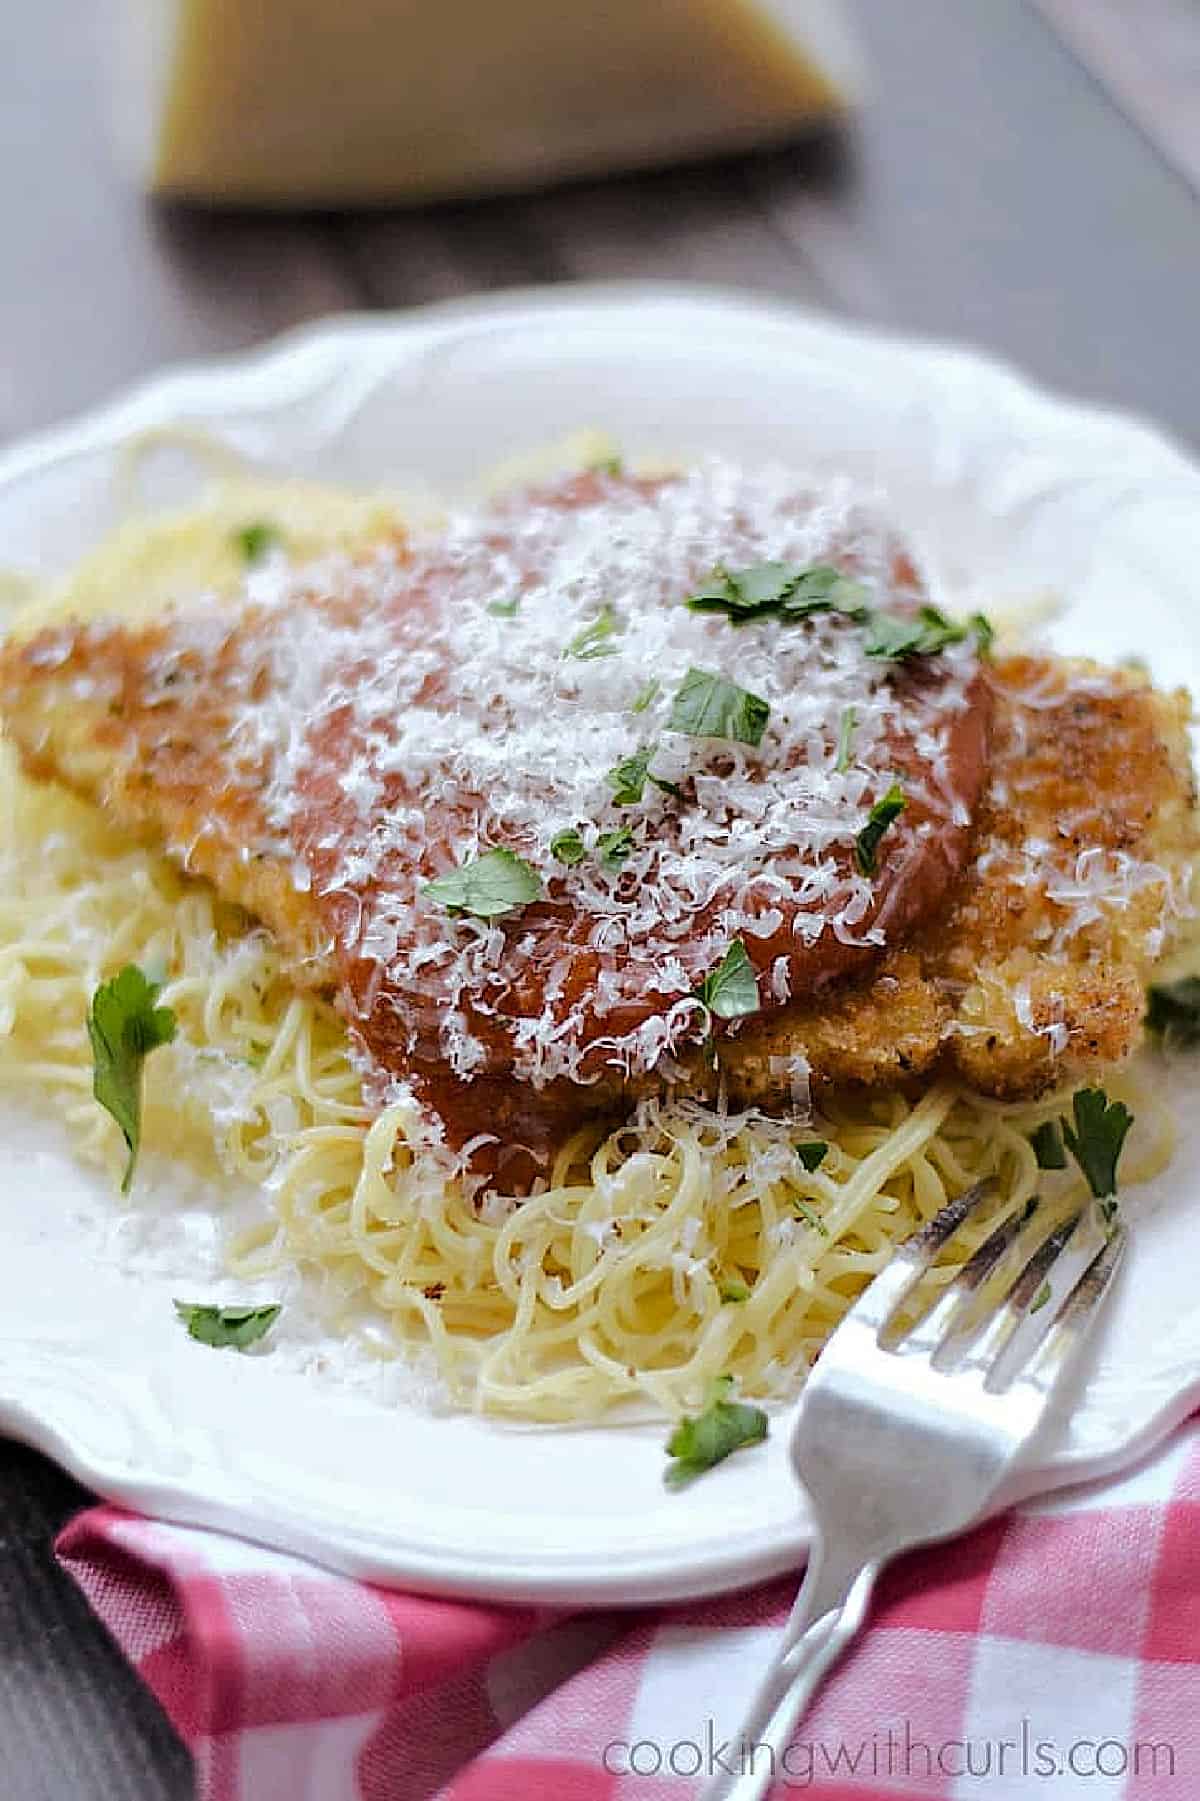 Crispy panko crusted chicken parmesan on a bed of angel hair pasta and topped with marinara sauce and grated parmesan.